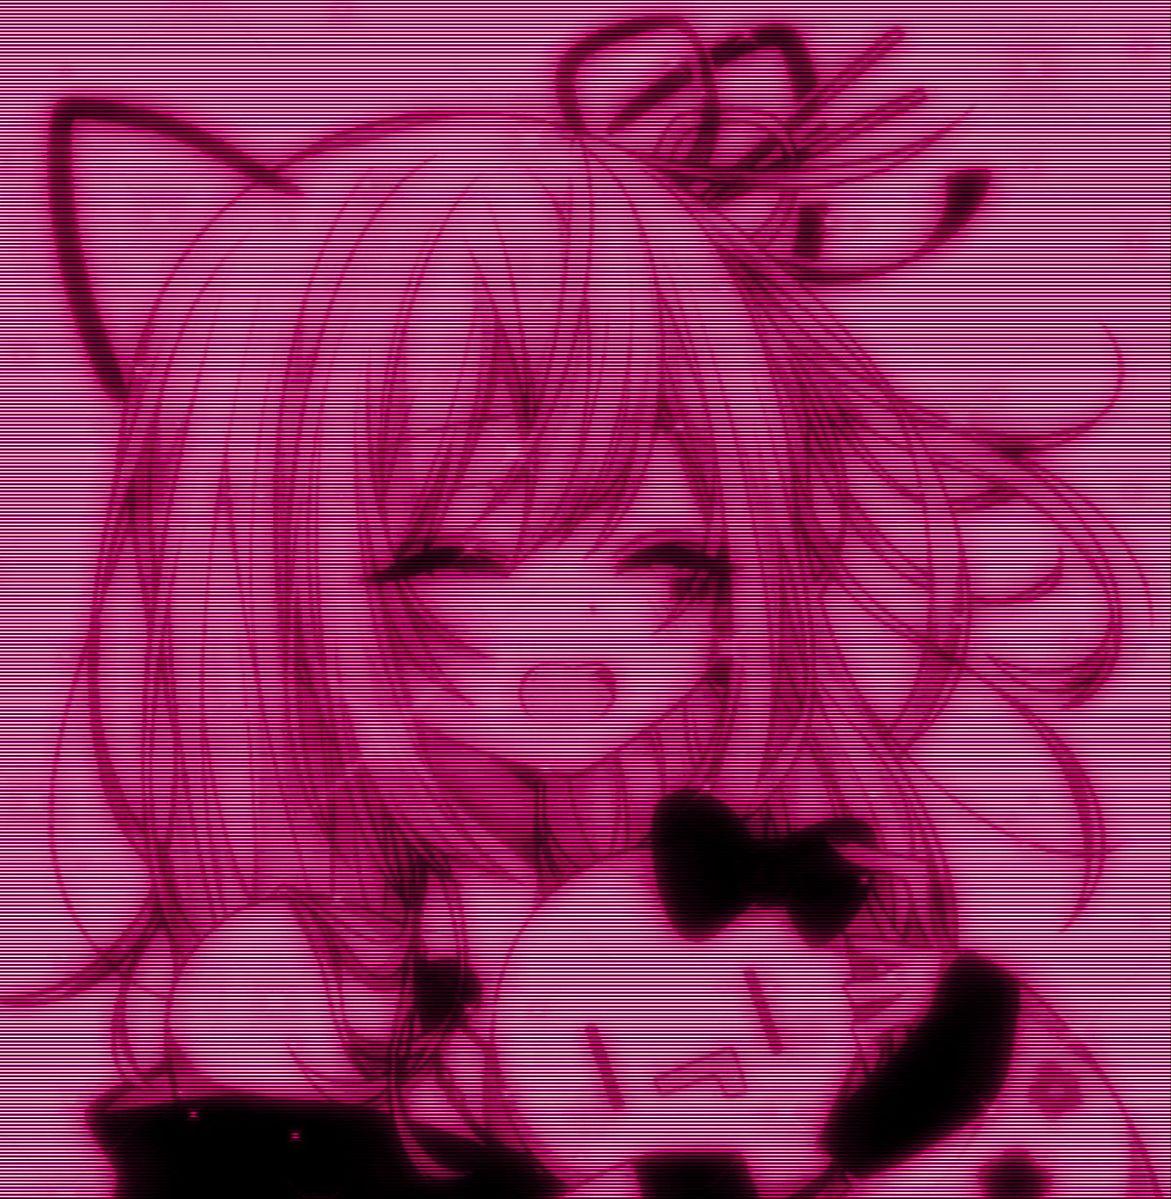 Chris Marie On Anime Pink And Black Wallpaper